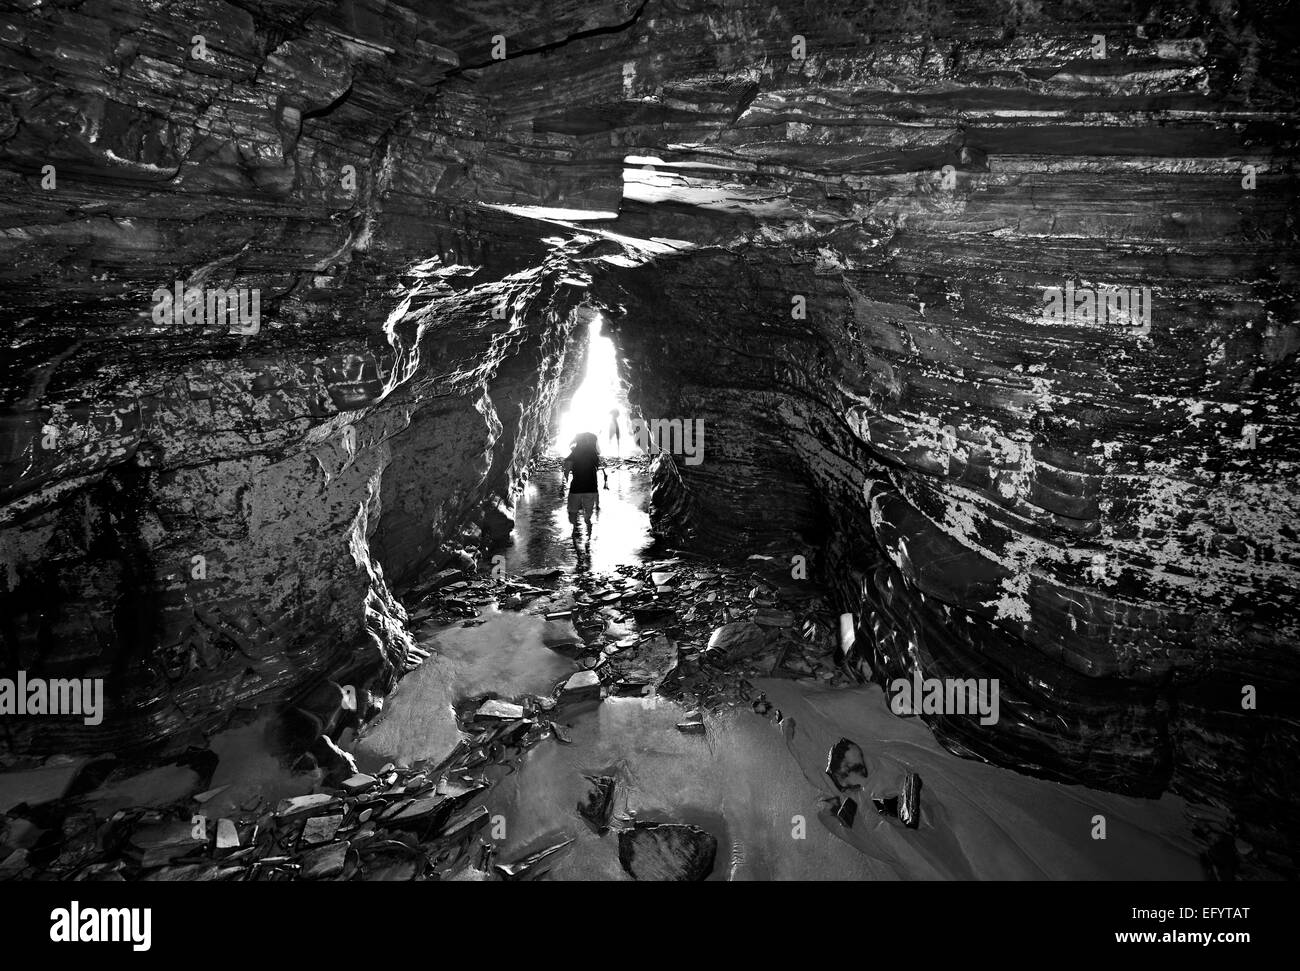 Spain, Galicia: People walking inside of a cave at Cathedral´s beach in black and white version Stock Photo